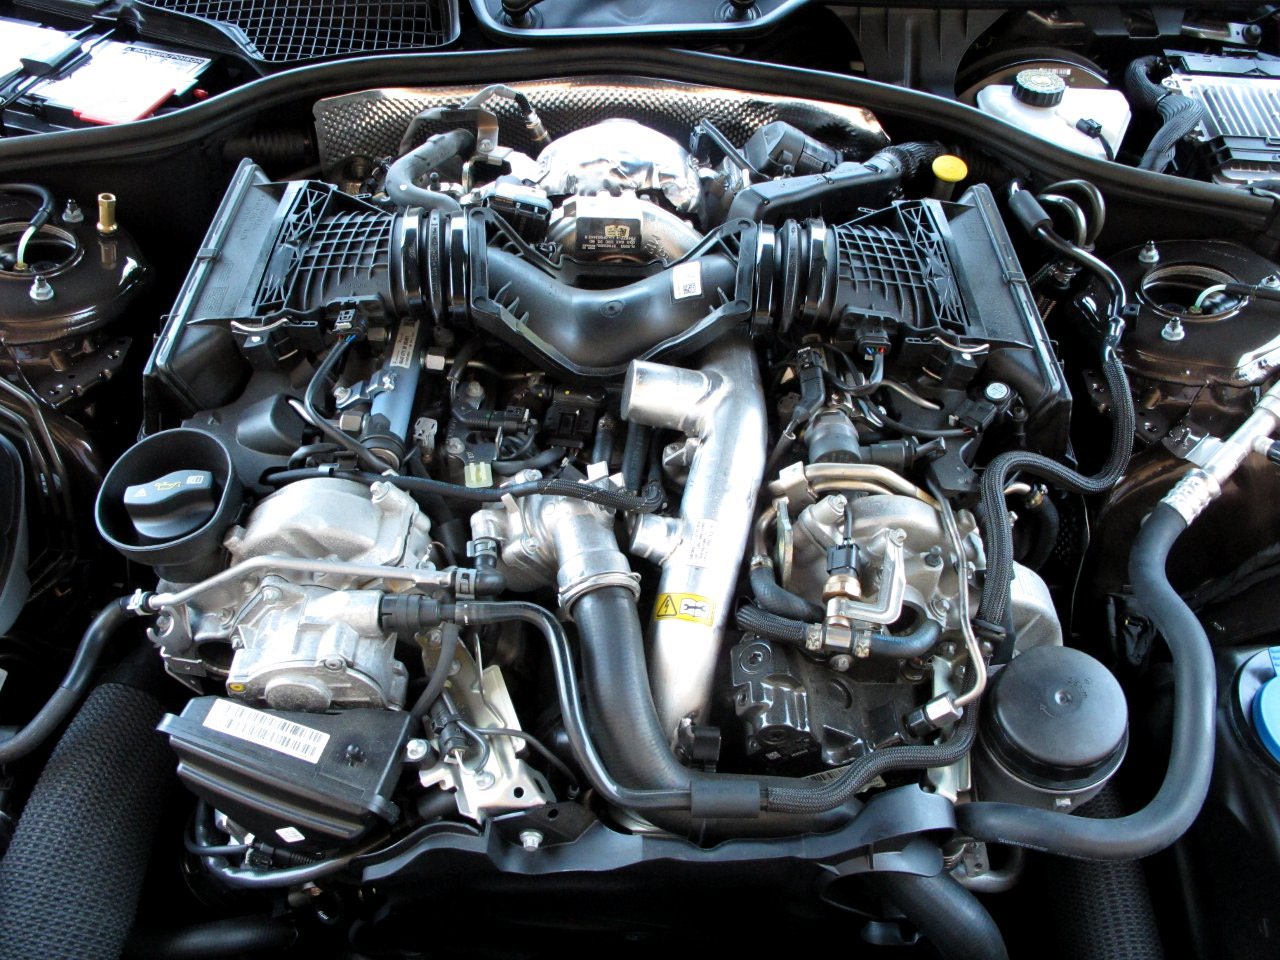 Best Mercedes Benz electrical diagnosis and repair in the Industry